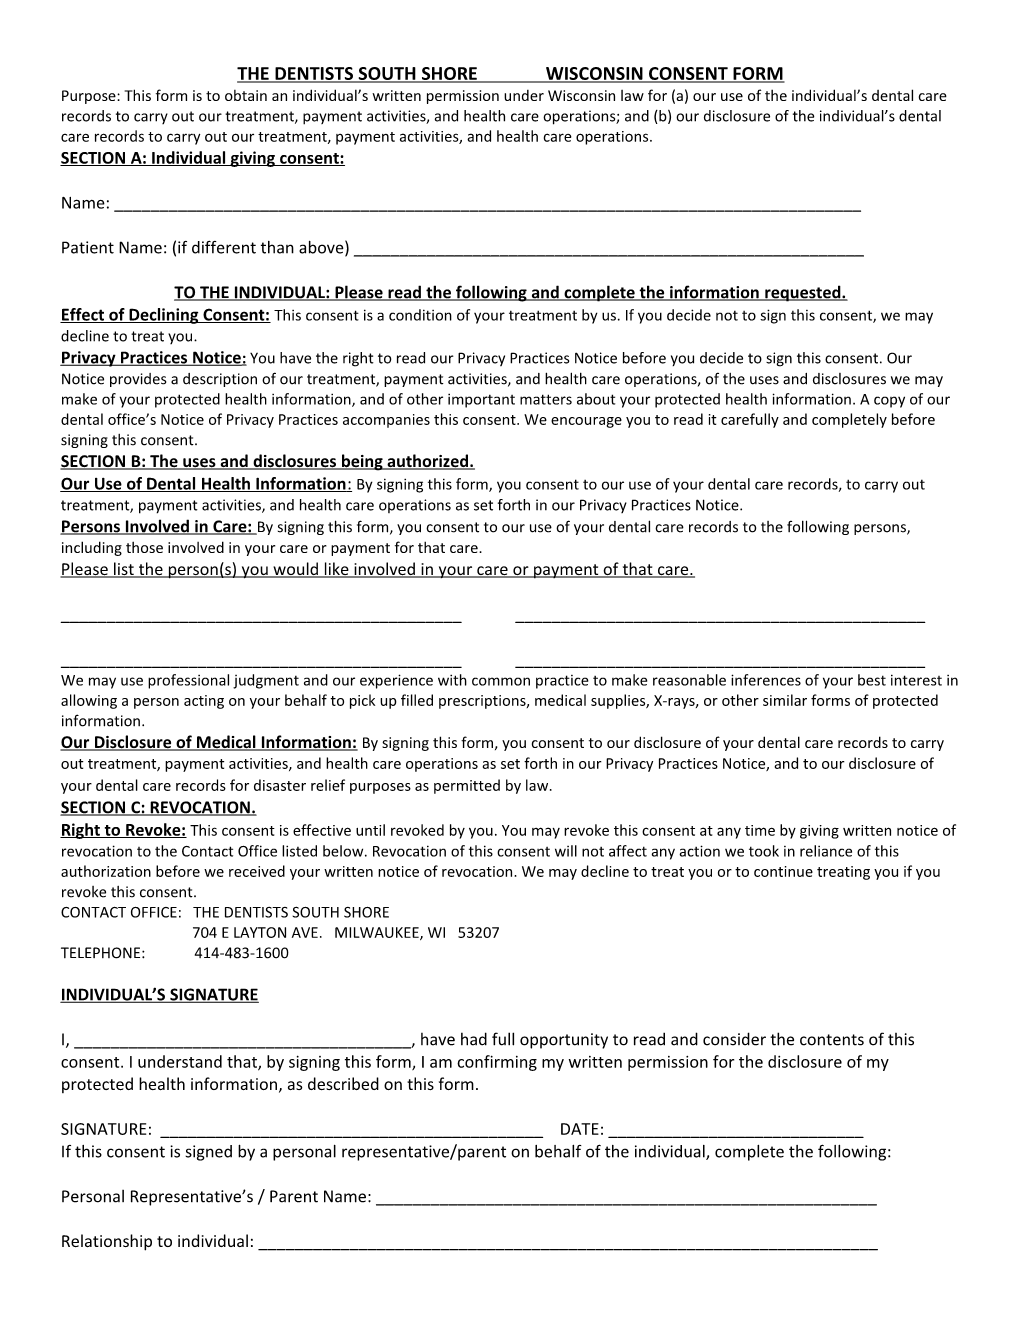 The Dentists South Shore Wisconsin Consent Form